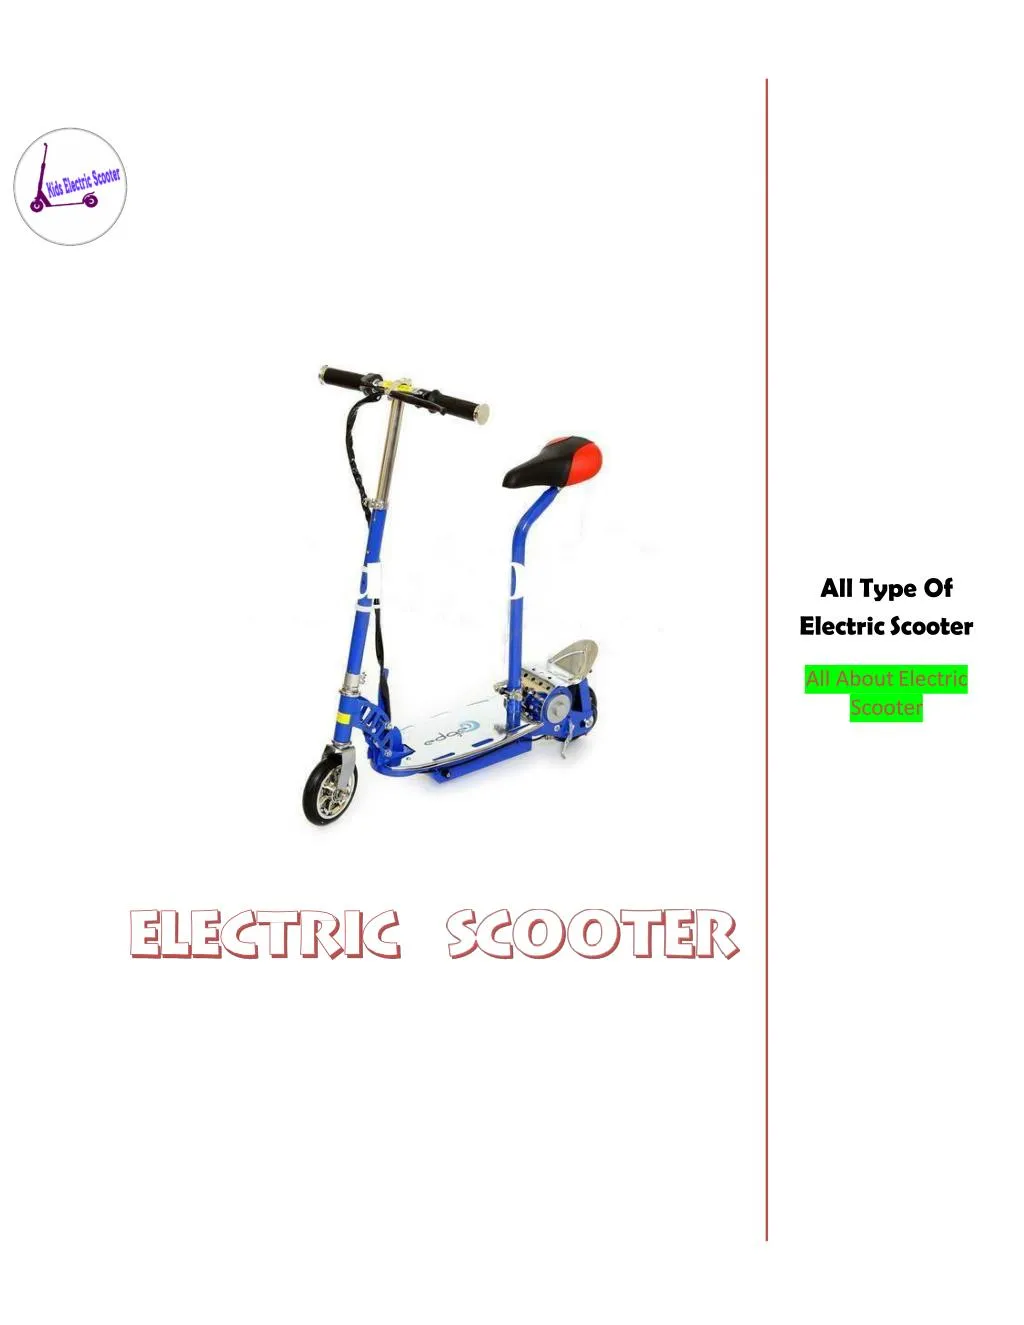 all type of electric scooter all about electric